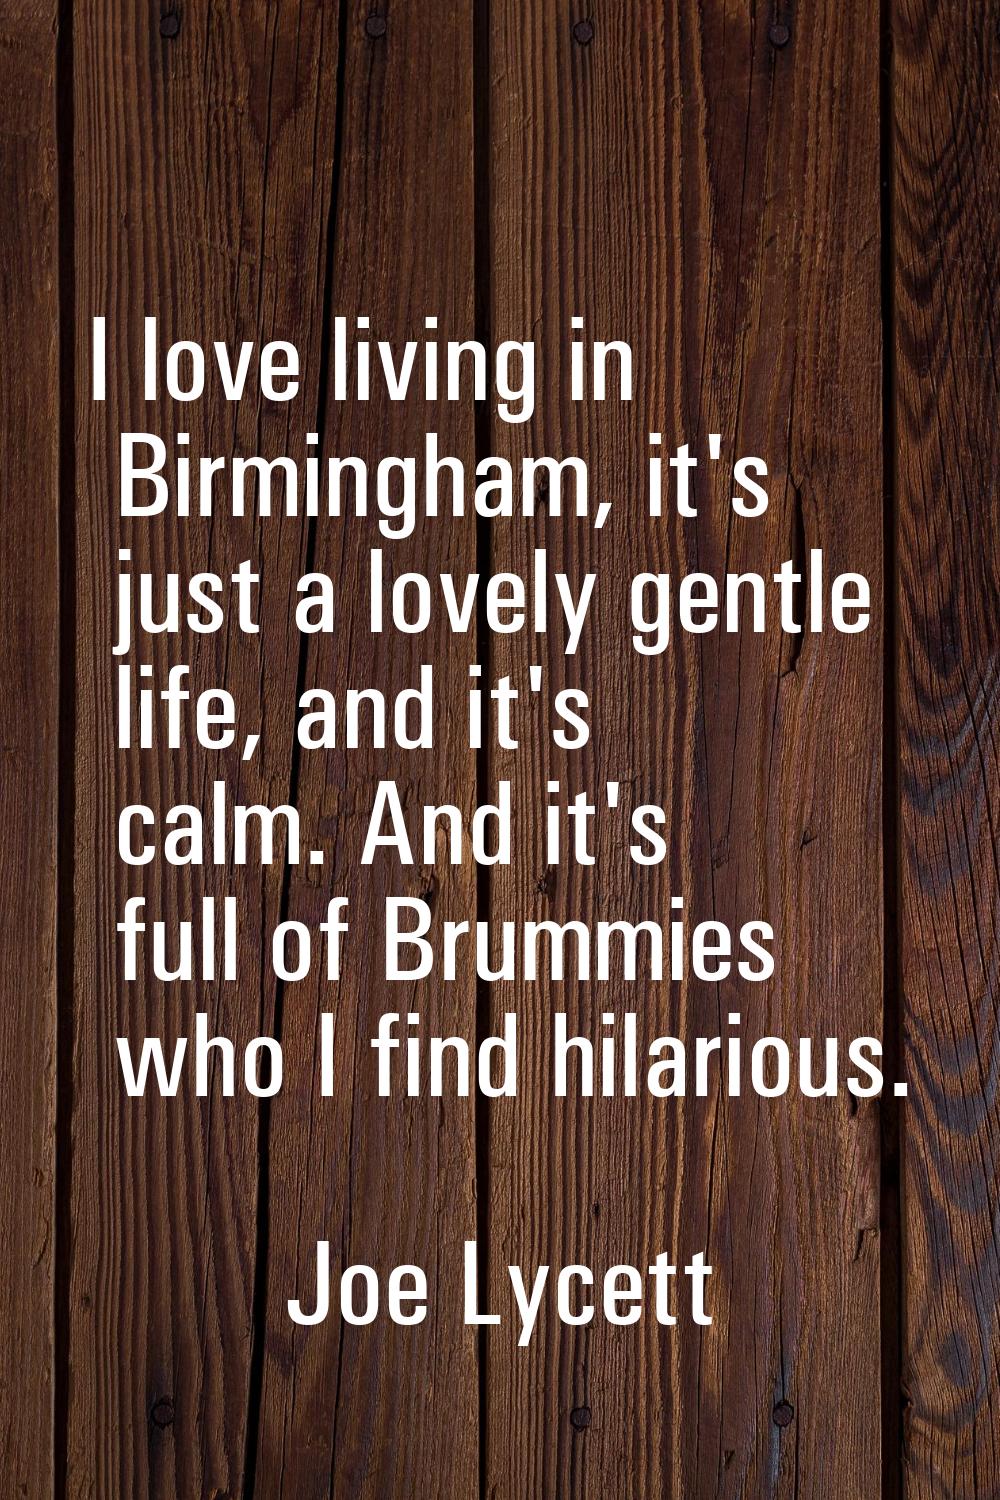 I love living in Birmingham, it's just a lovely gentle life, and it's calm. And it's full of Brummi